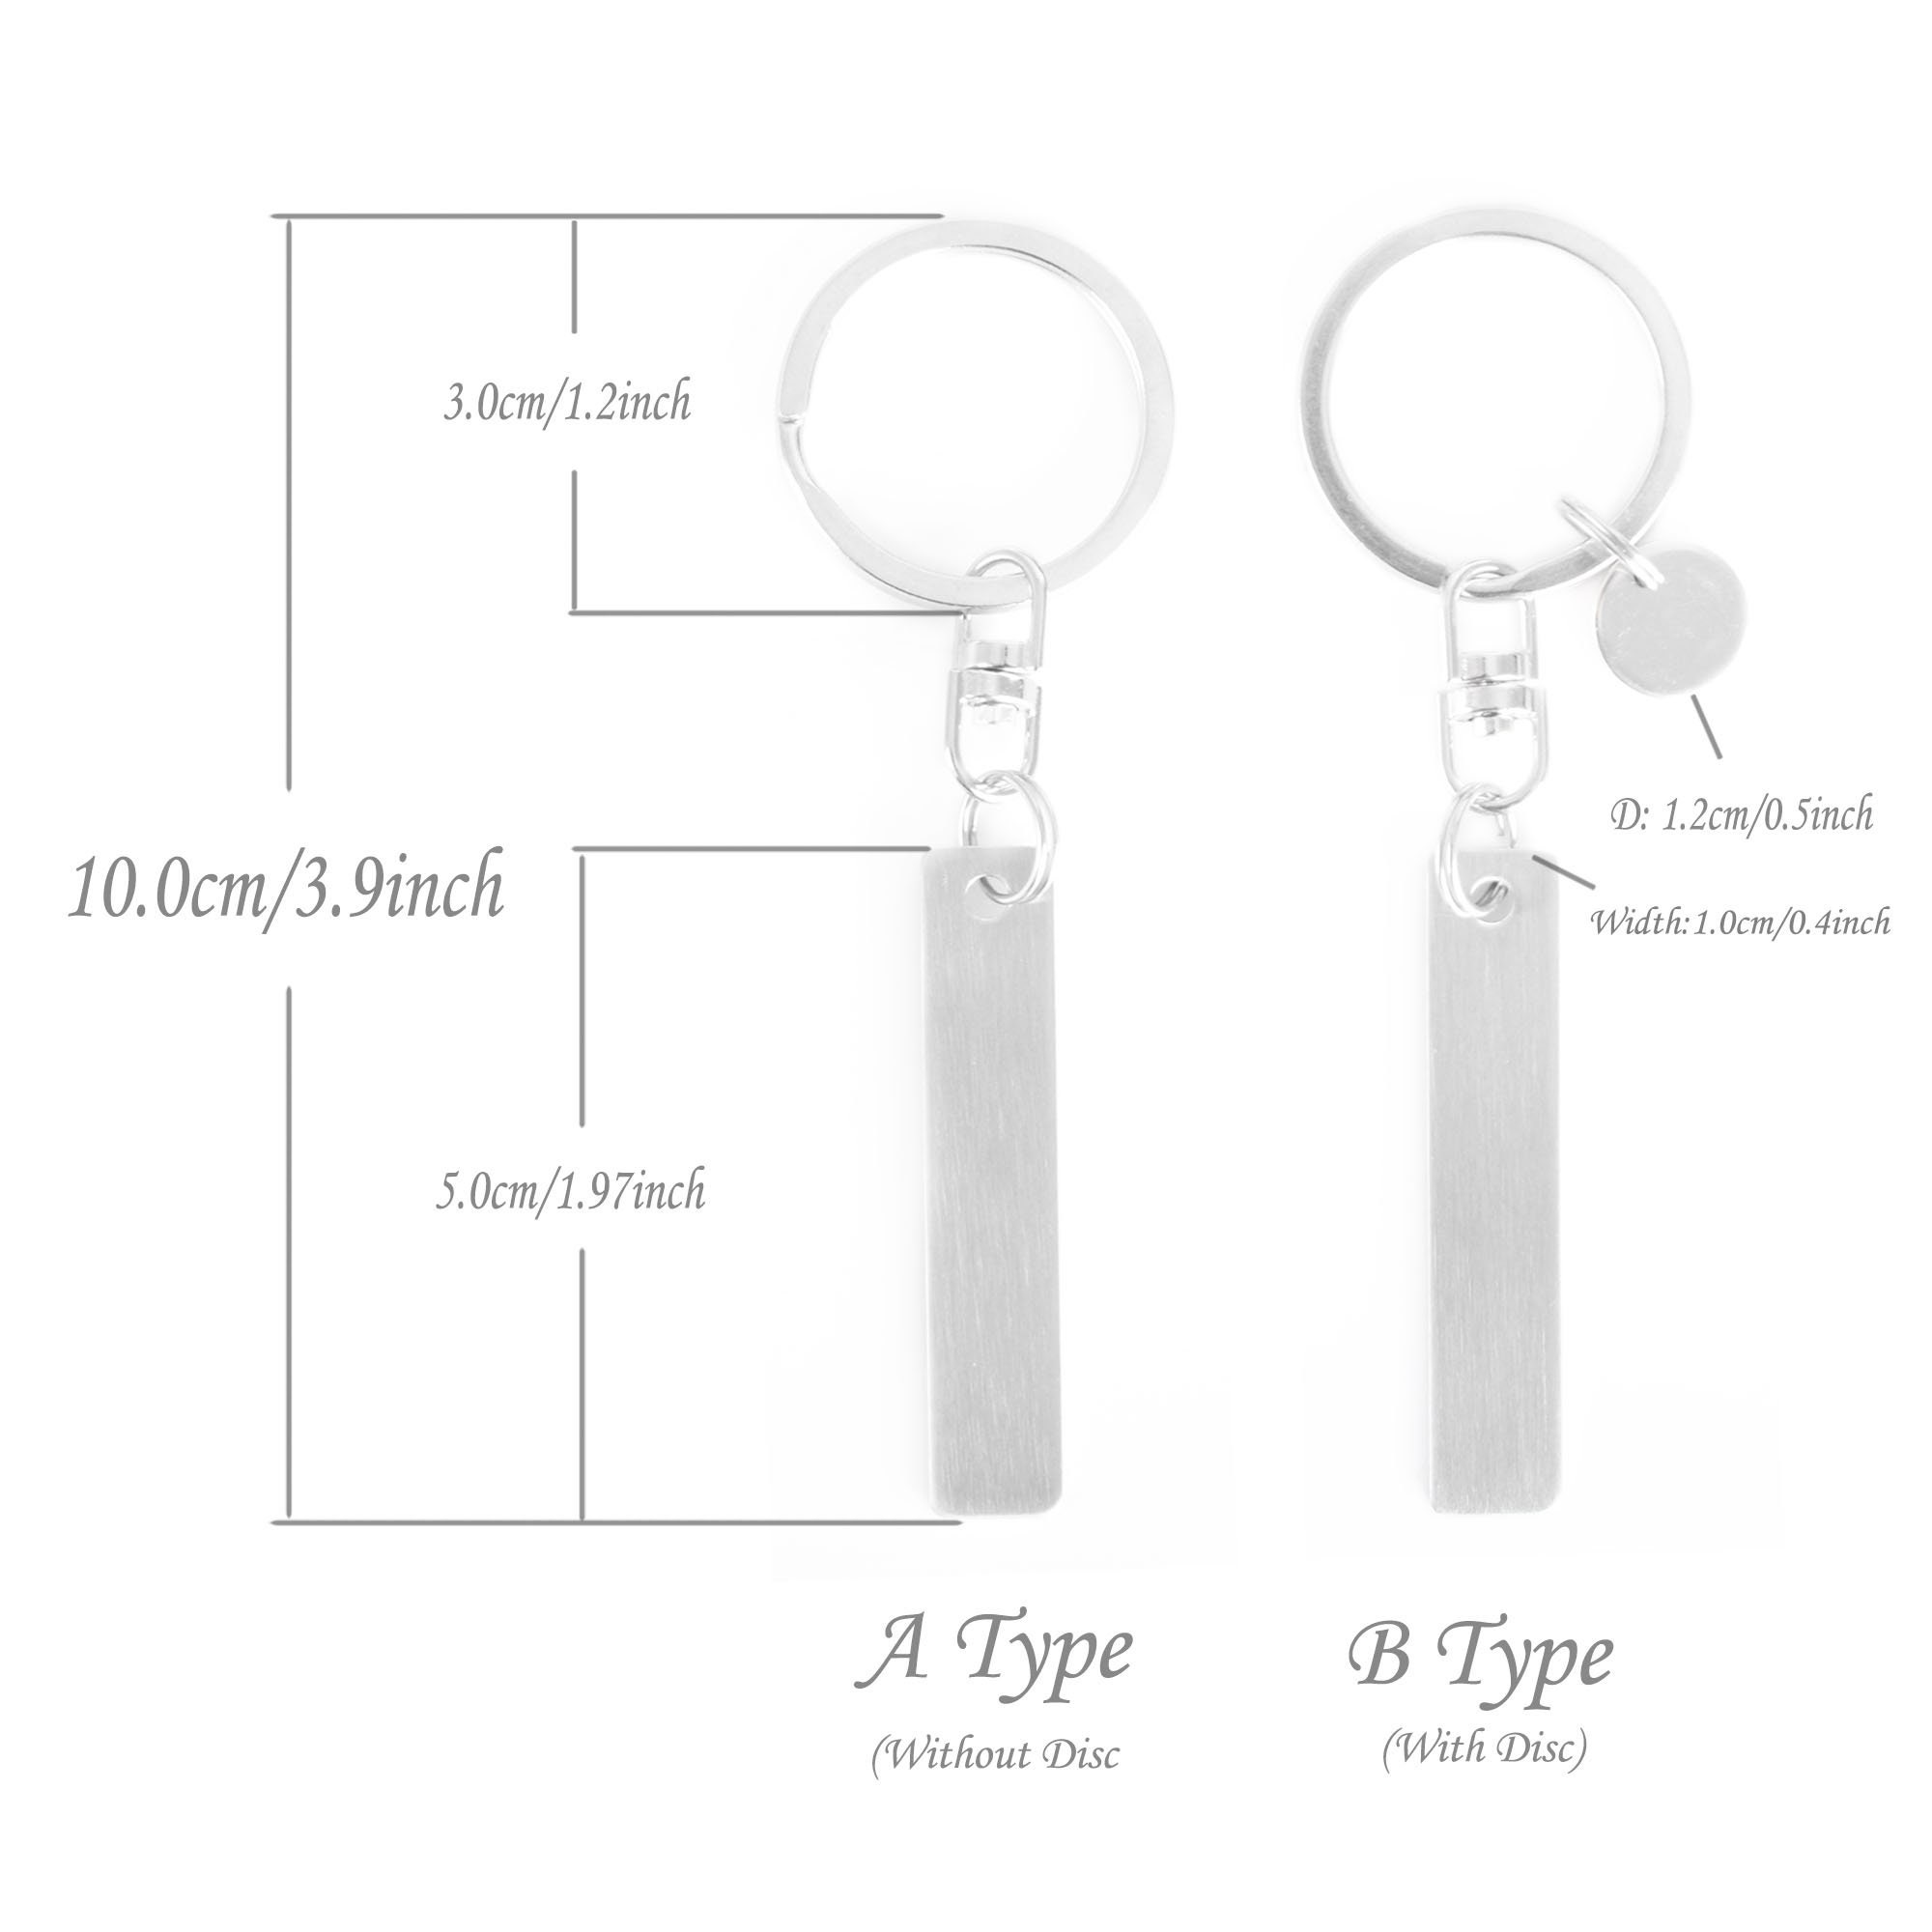 Supply Lin's LS factory direct steel key chain waist buckle strong key ring